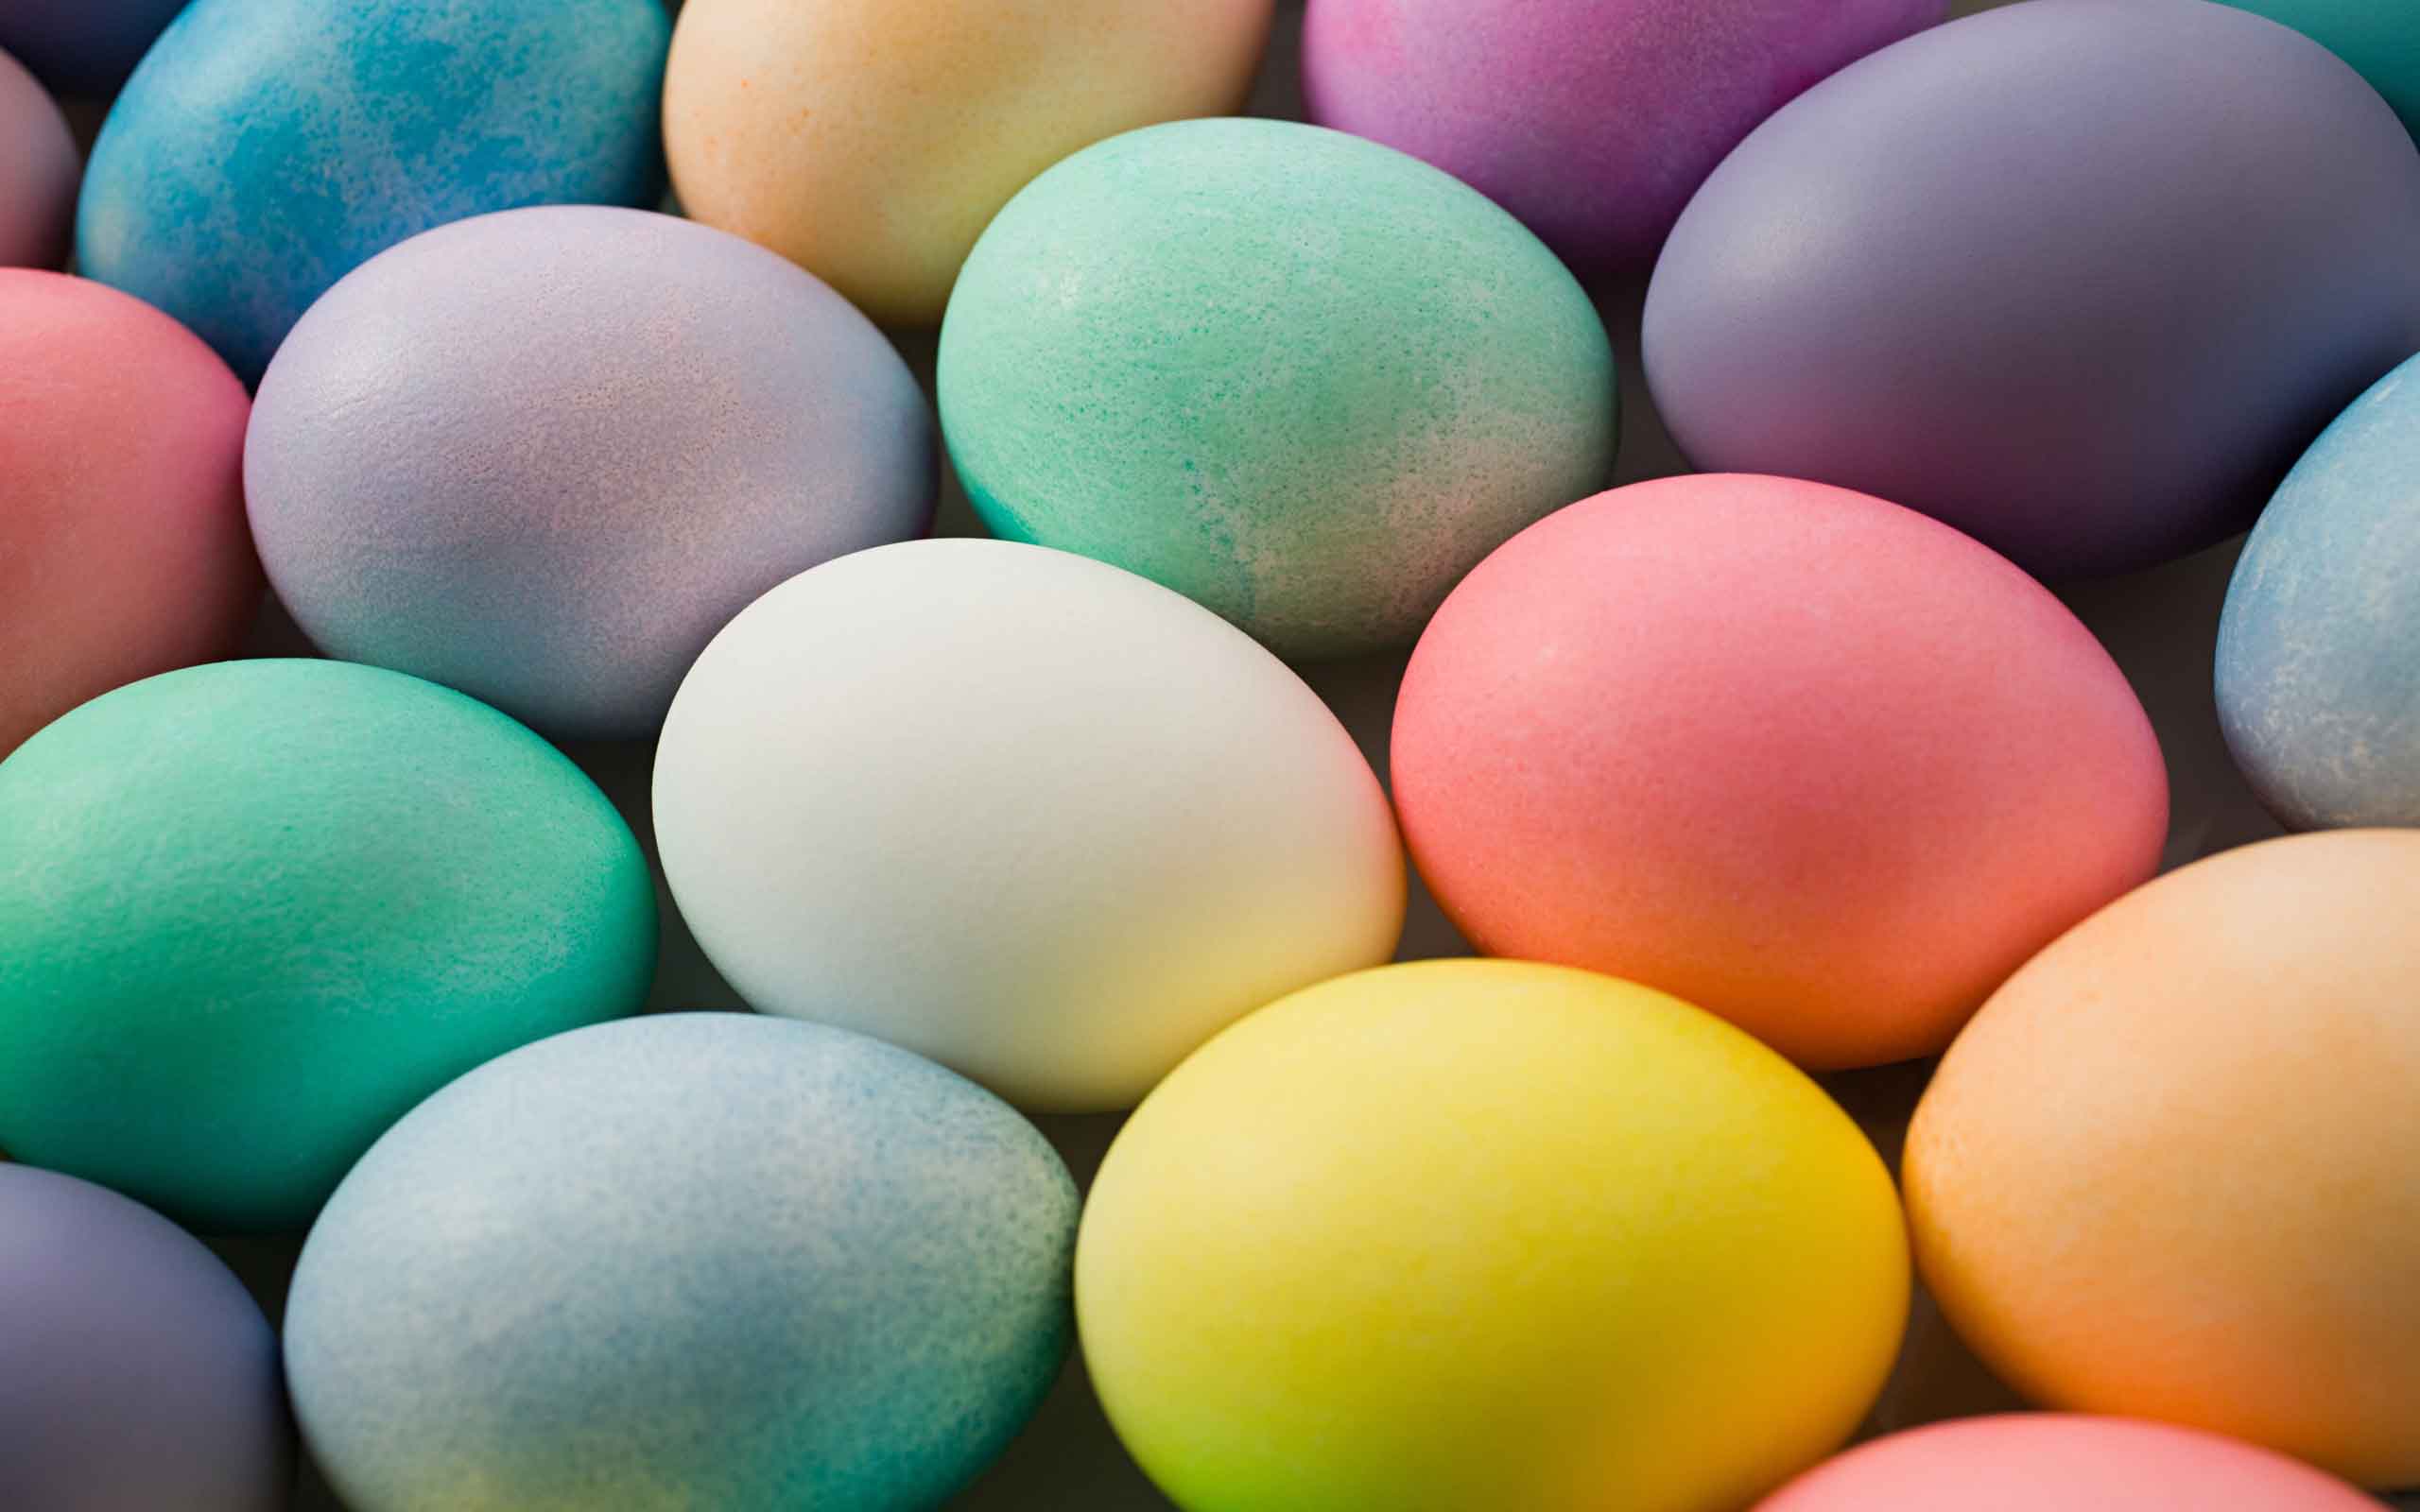 Colorful Easter Eggs Wallpaper 28245 2560x1600 px